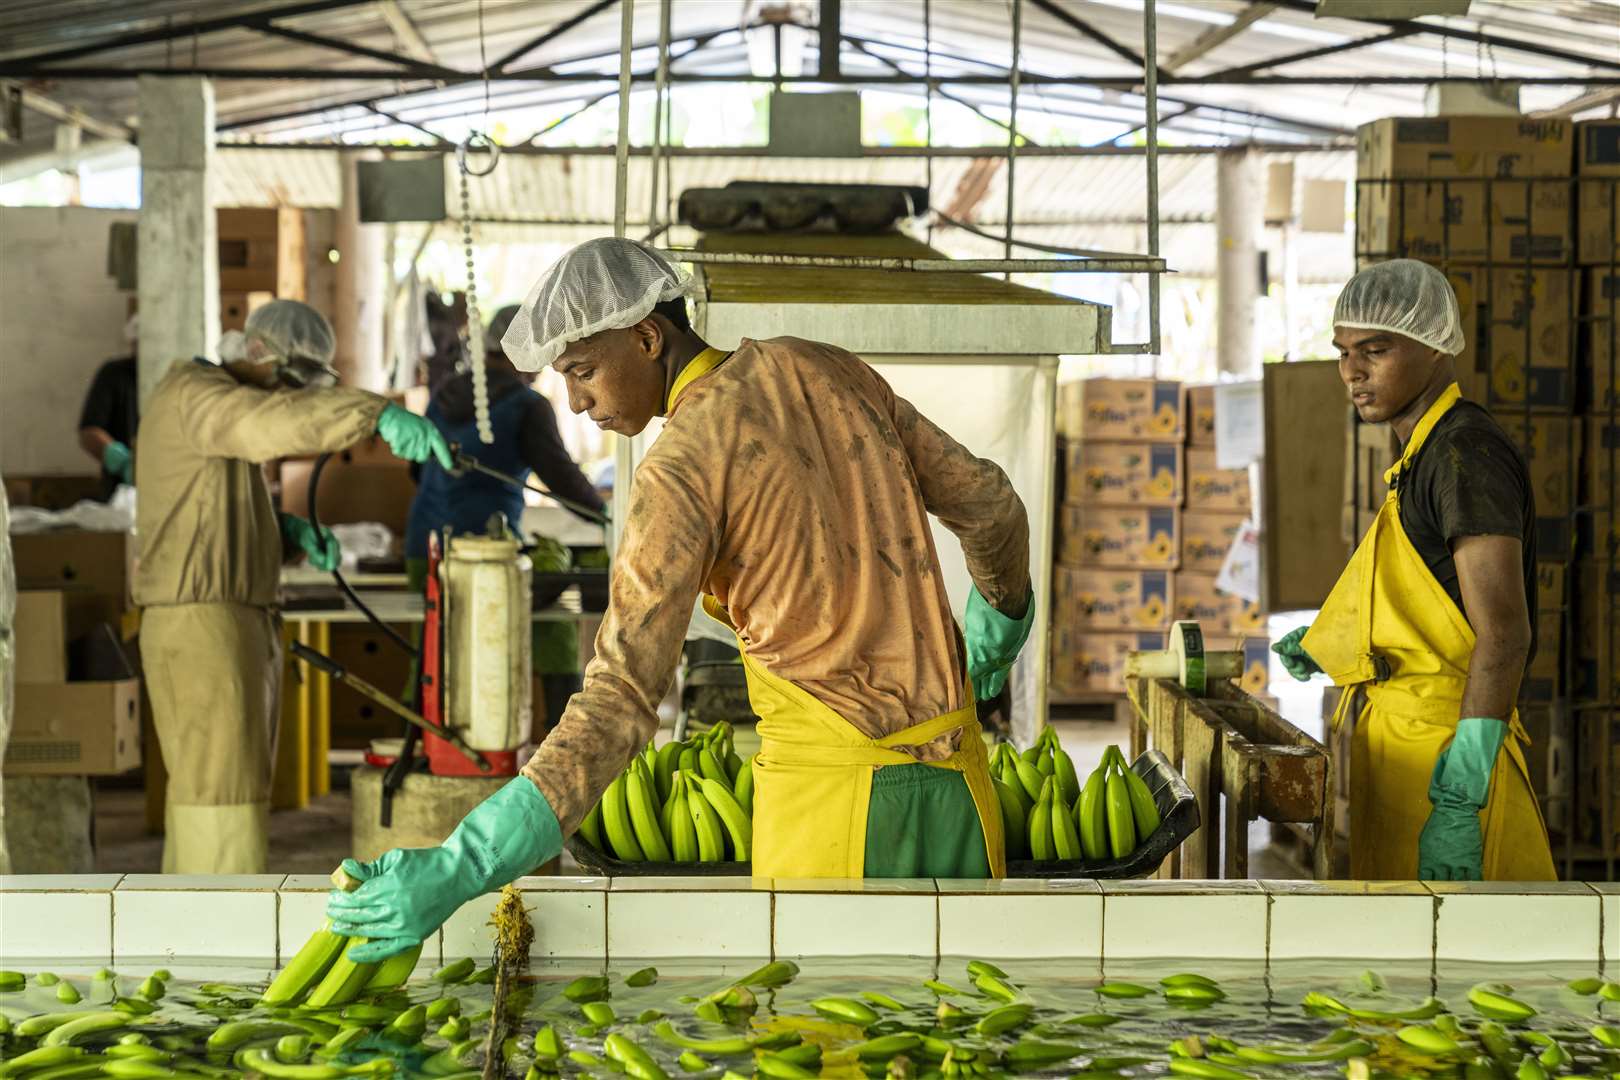 Workers processing bananas at a farm near Orihueca, in the region of Magdalena, Colombia (Chris Terry/Fairtrade/PA)